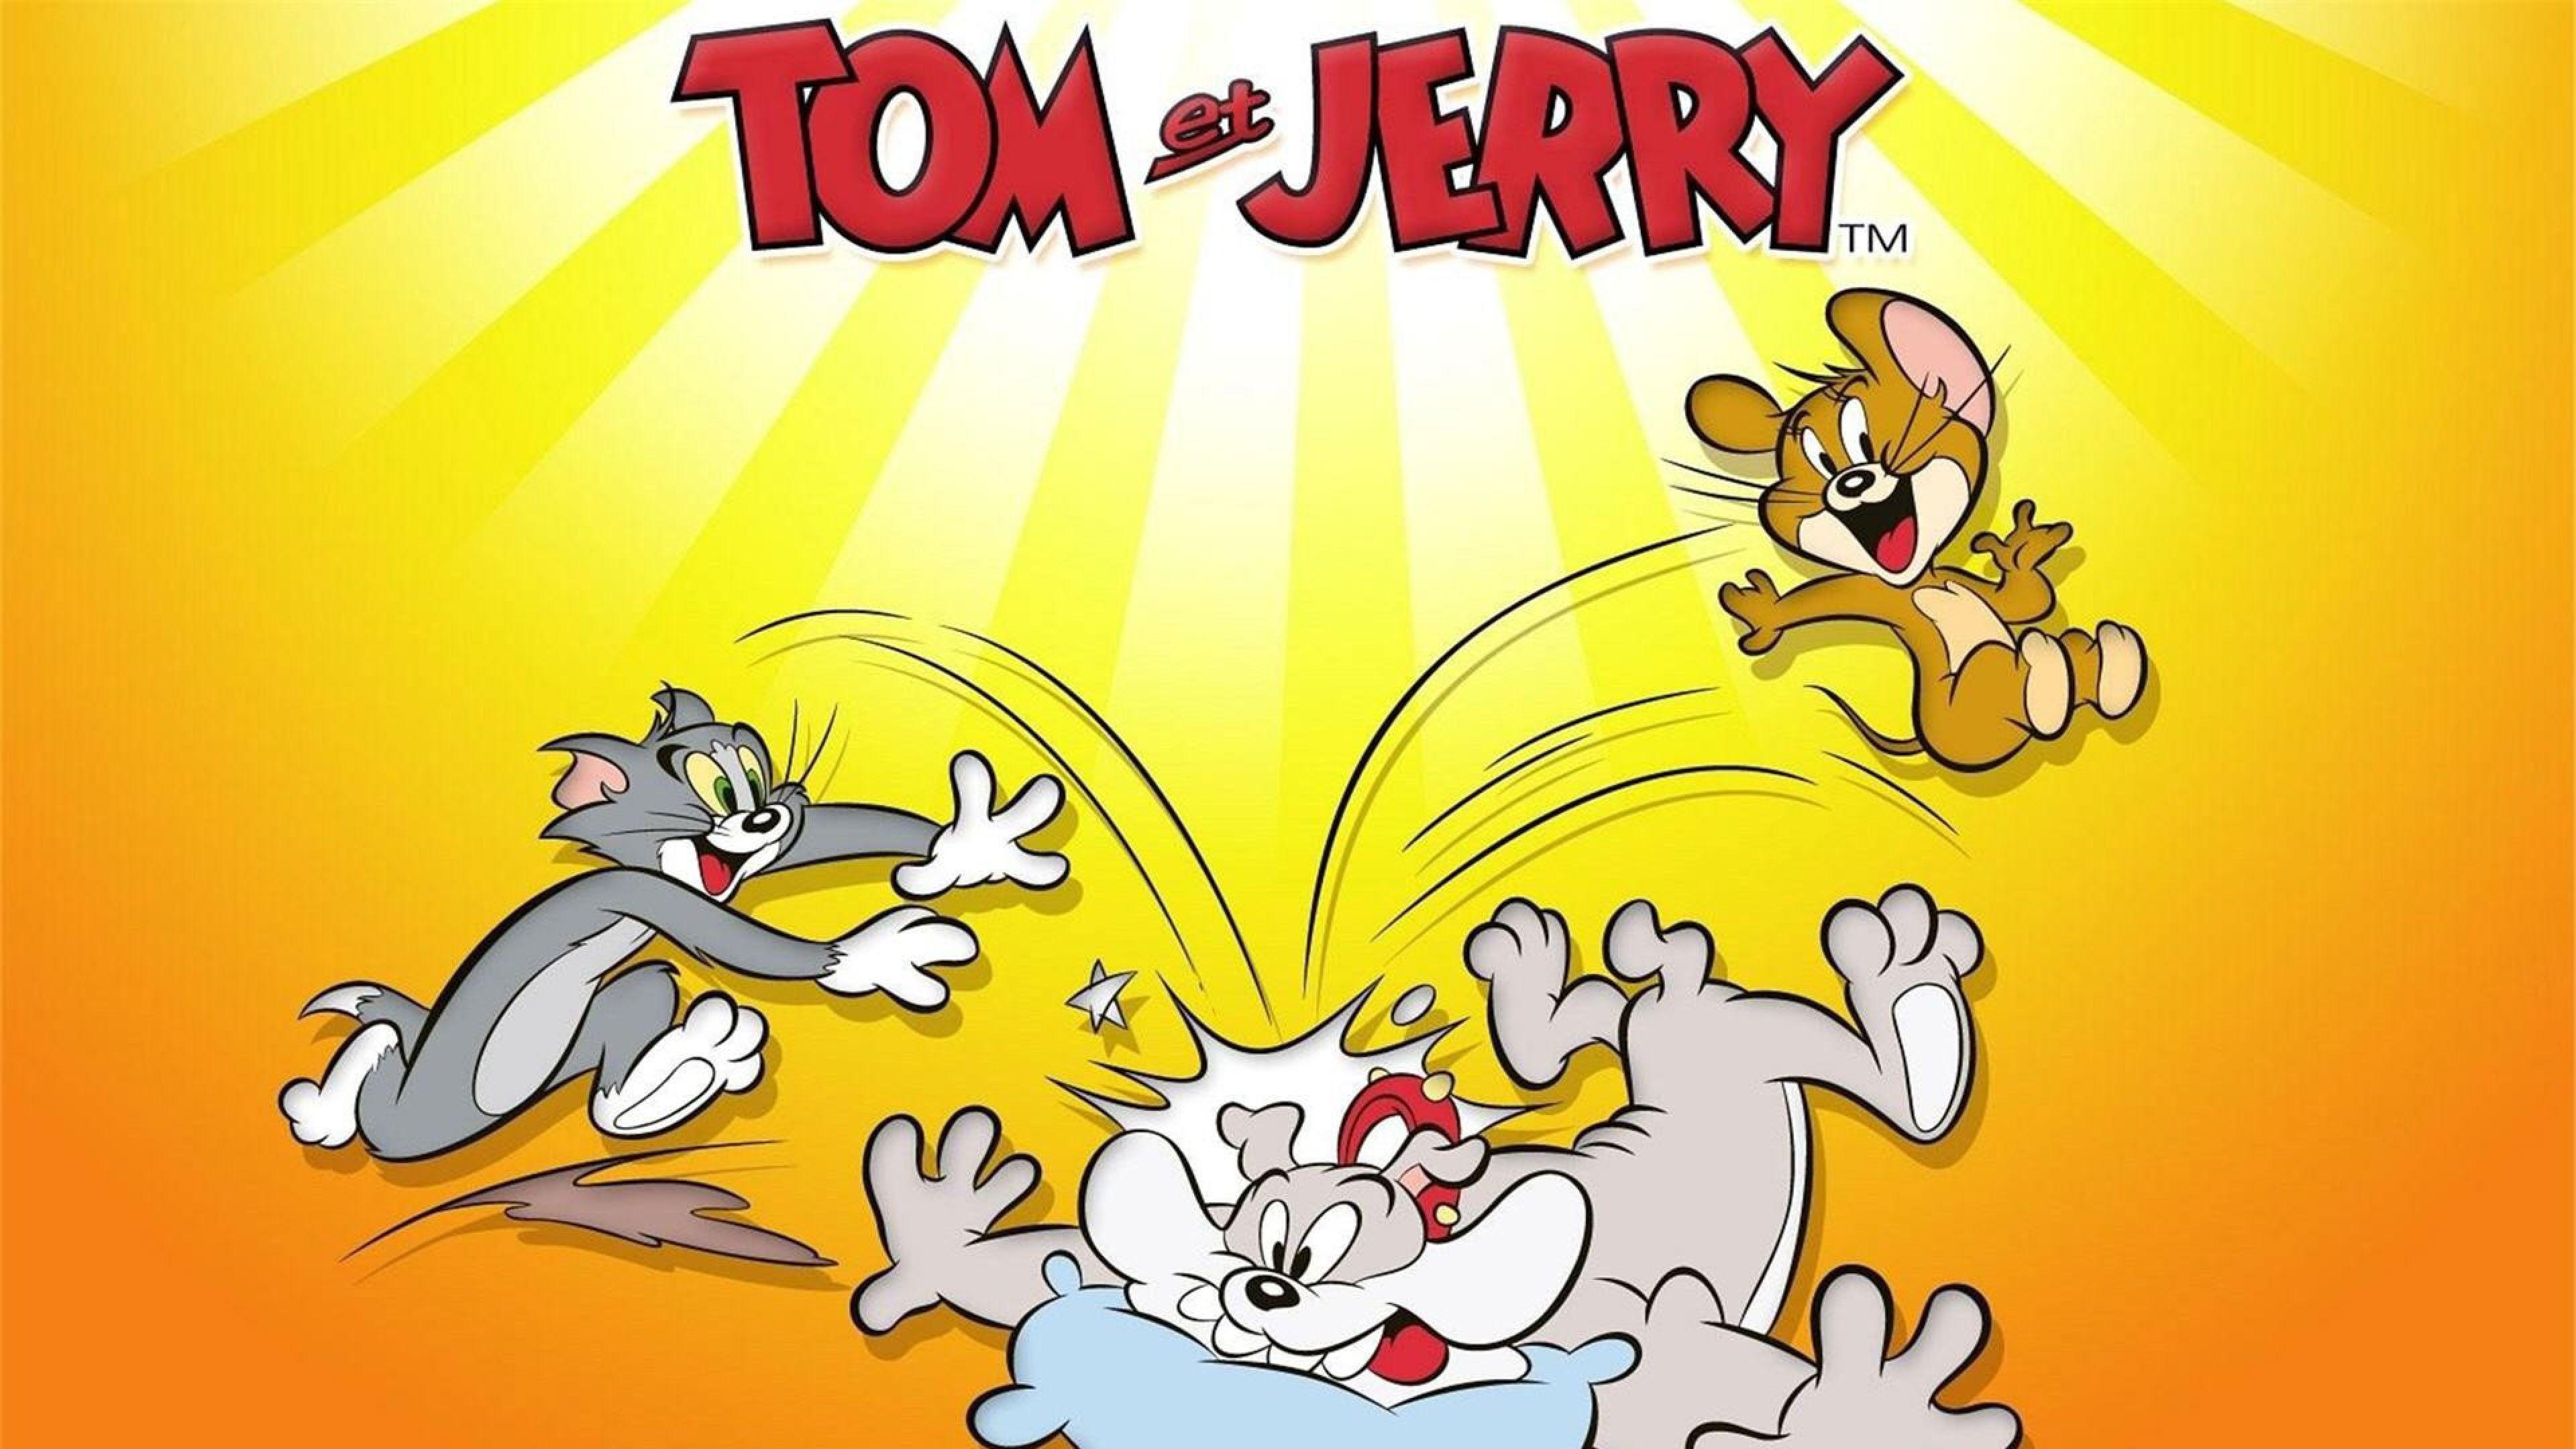 HD wallpaper Tom And Jerry Mouse Trouble 2014 Wallpaper Widescreen Hd  Resolution 25601600  Wallpaper Flare